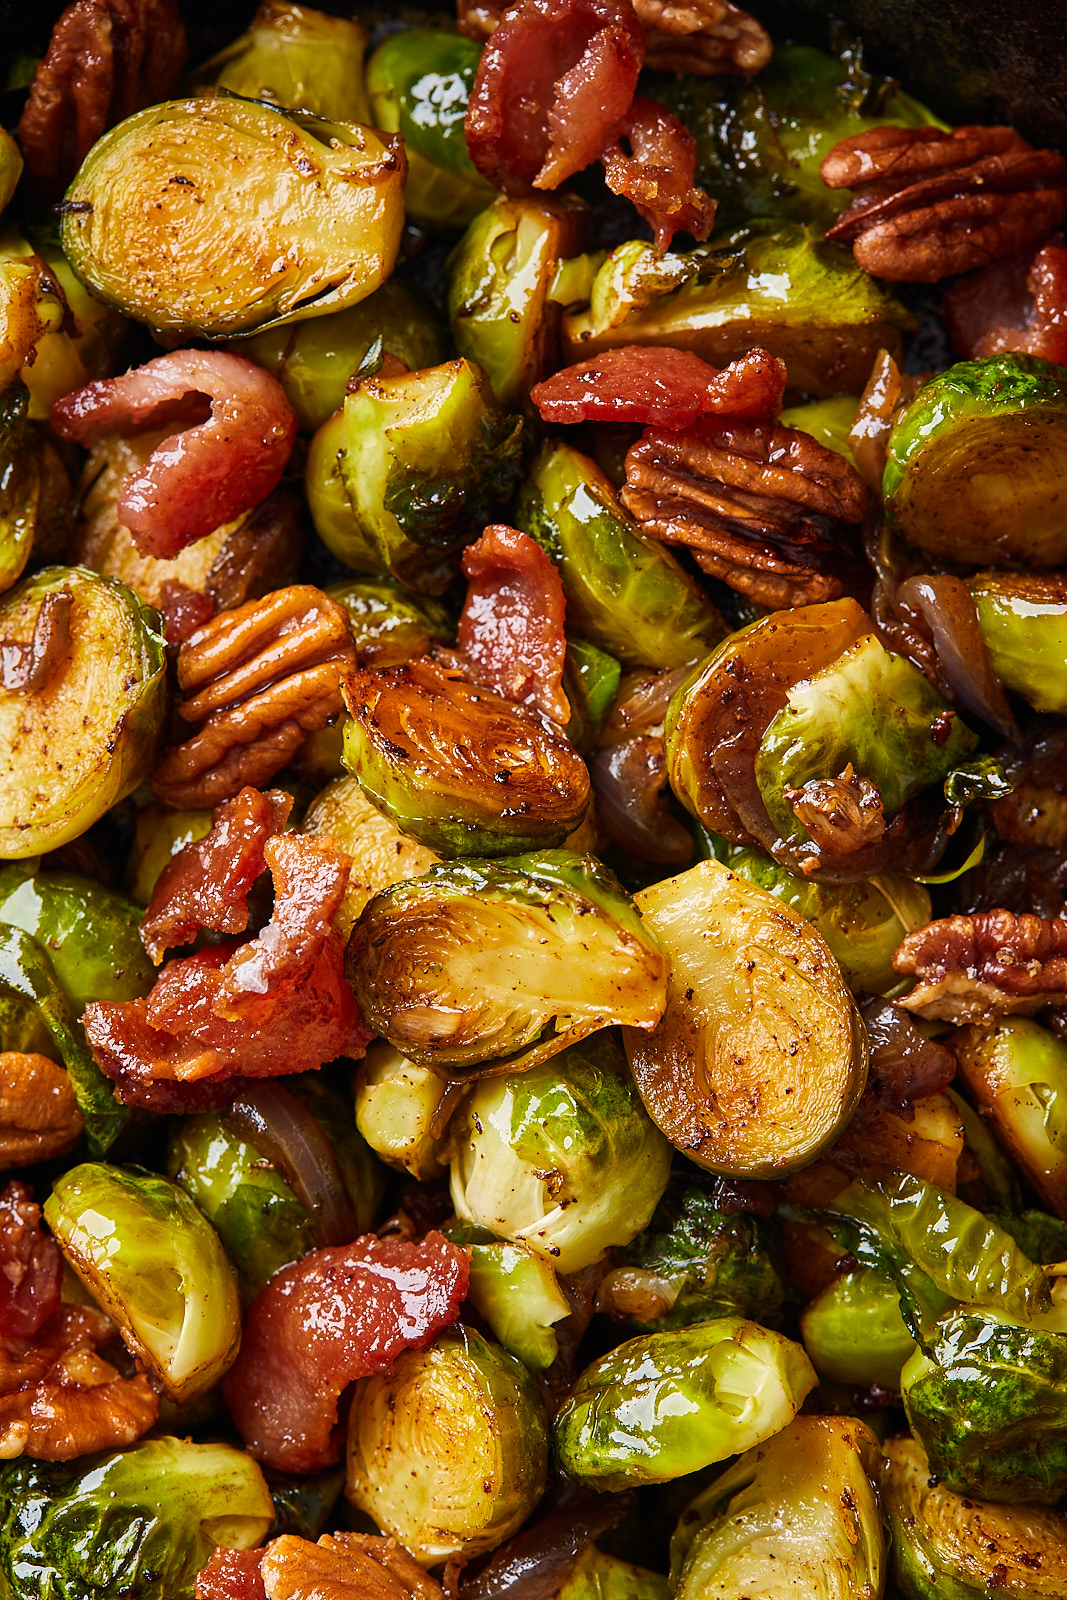 Roasted Brussel Sprouts With Candied Pecans and Bacon